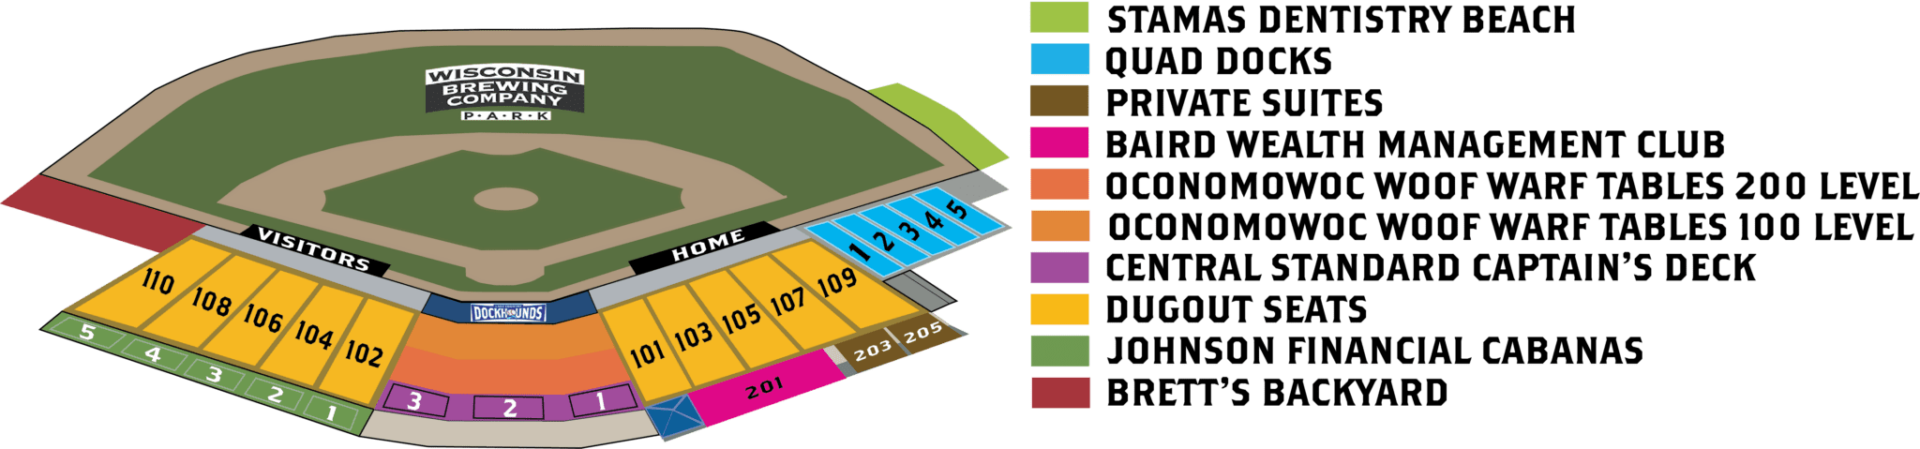 Stadium seating map for Wisconsin Brewing Company Park